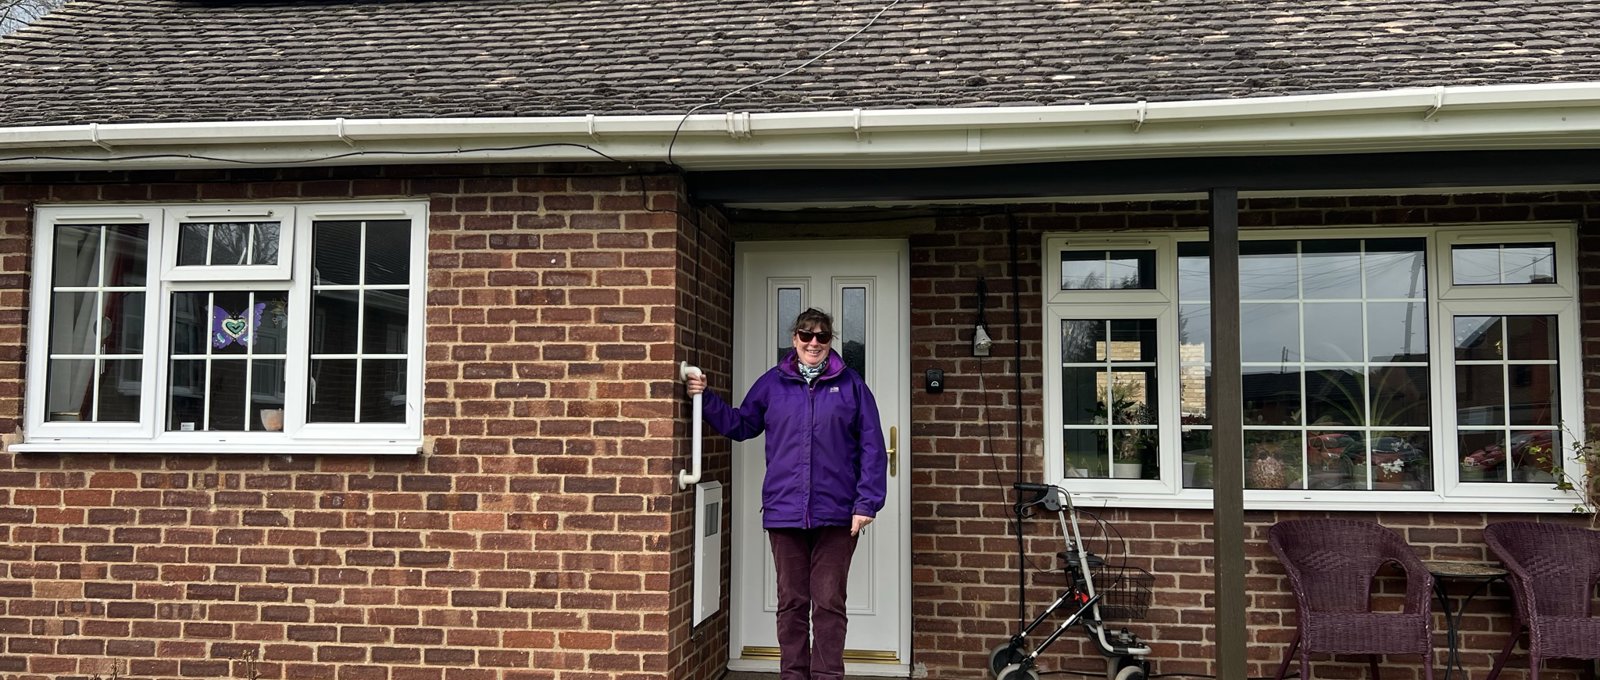 Photo of a Futures' customer called Lucille, standing on the front step outside her bungalow. She's wearing a purple coat and purple trousers, has dark hair tied up and sunglasses. Her bungalow has solar panels on the roof.